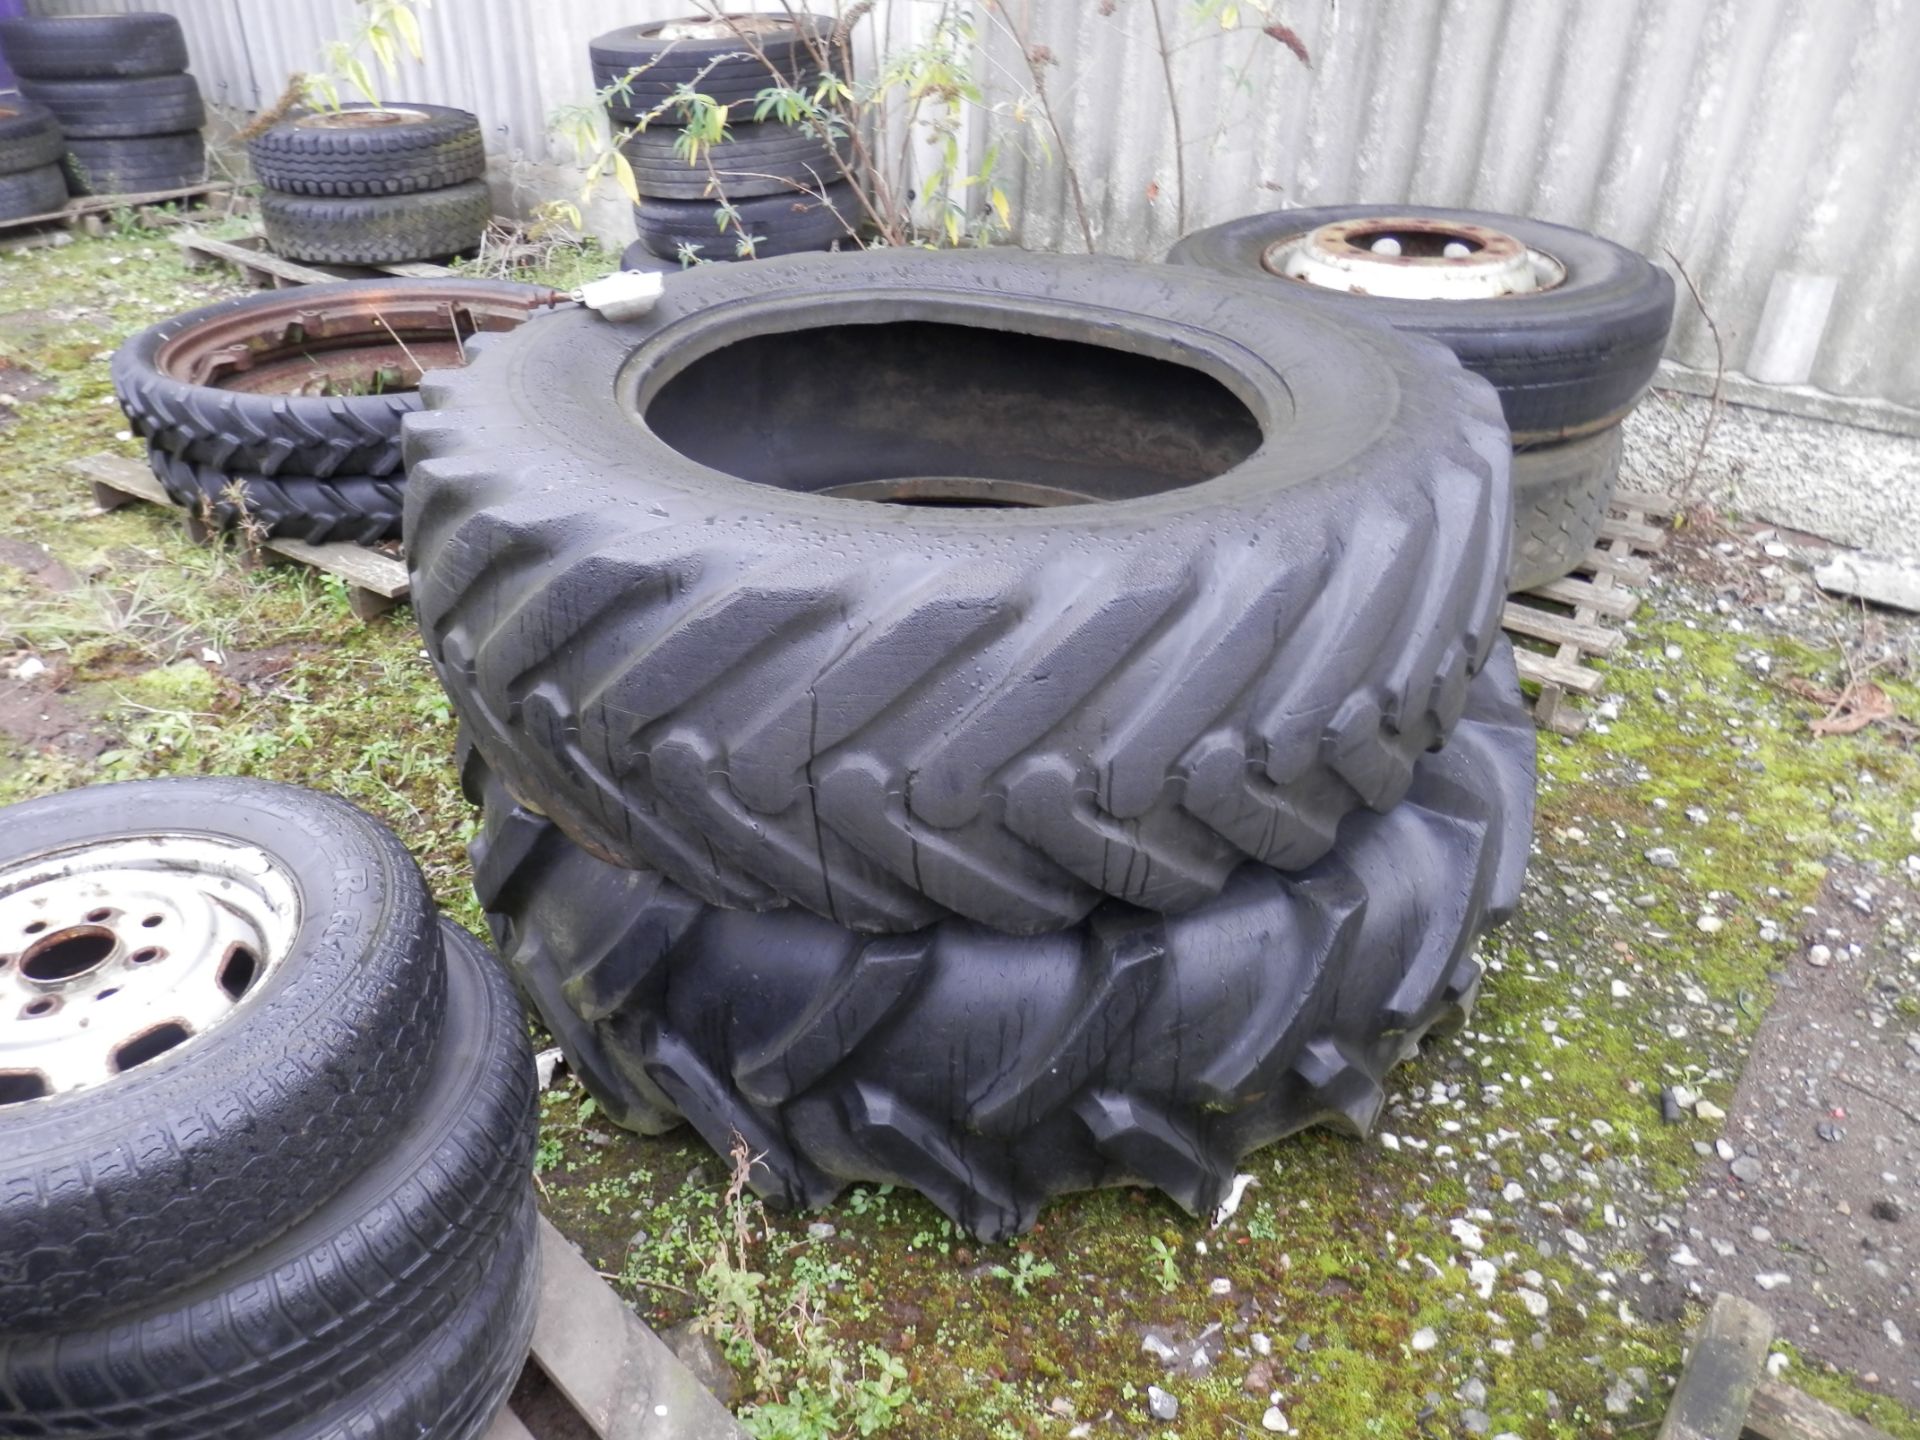 85 + ASSORTED LORRY, CAR & TRAILER TYRES & WHEELS, AS PICTURED. BUYER TO COLLECT COMPLETE - Image 2 of 10